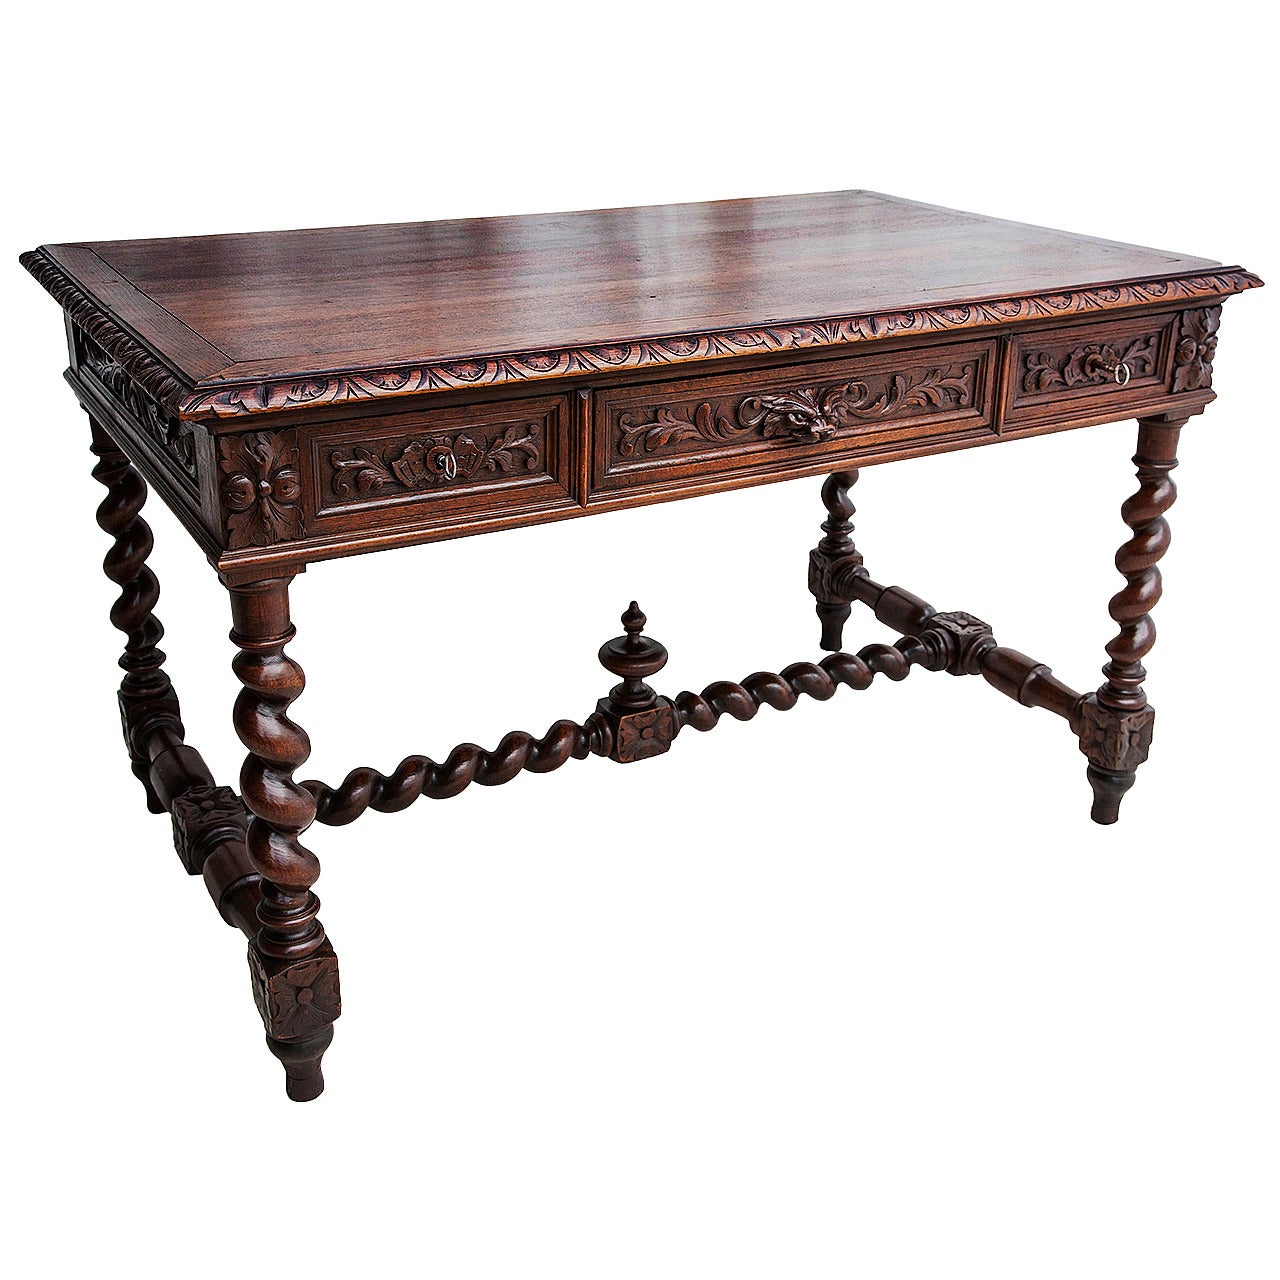 19th Century French Handcarved Louis XIII Desk with Three Drawers